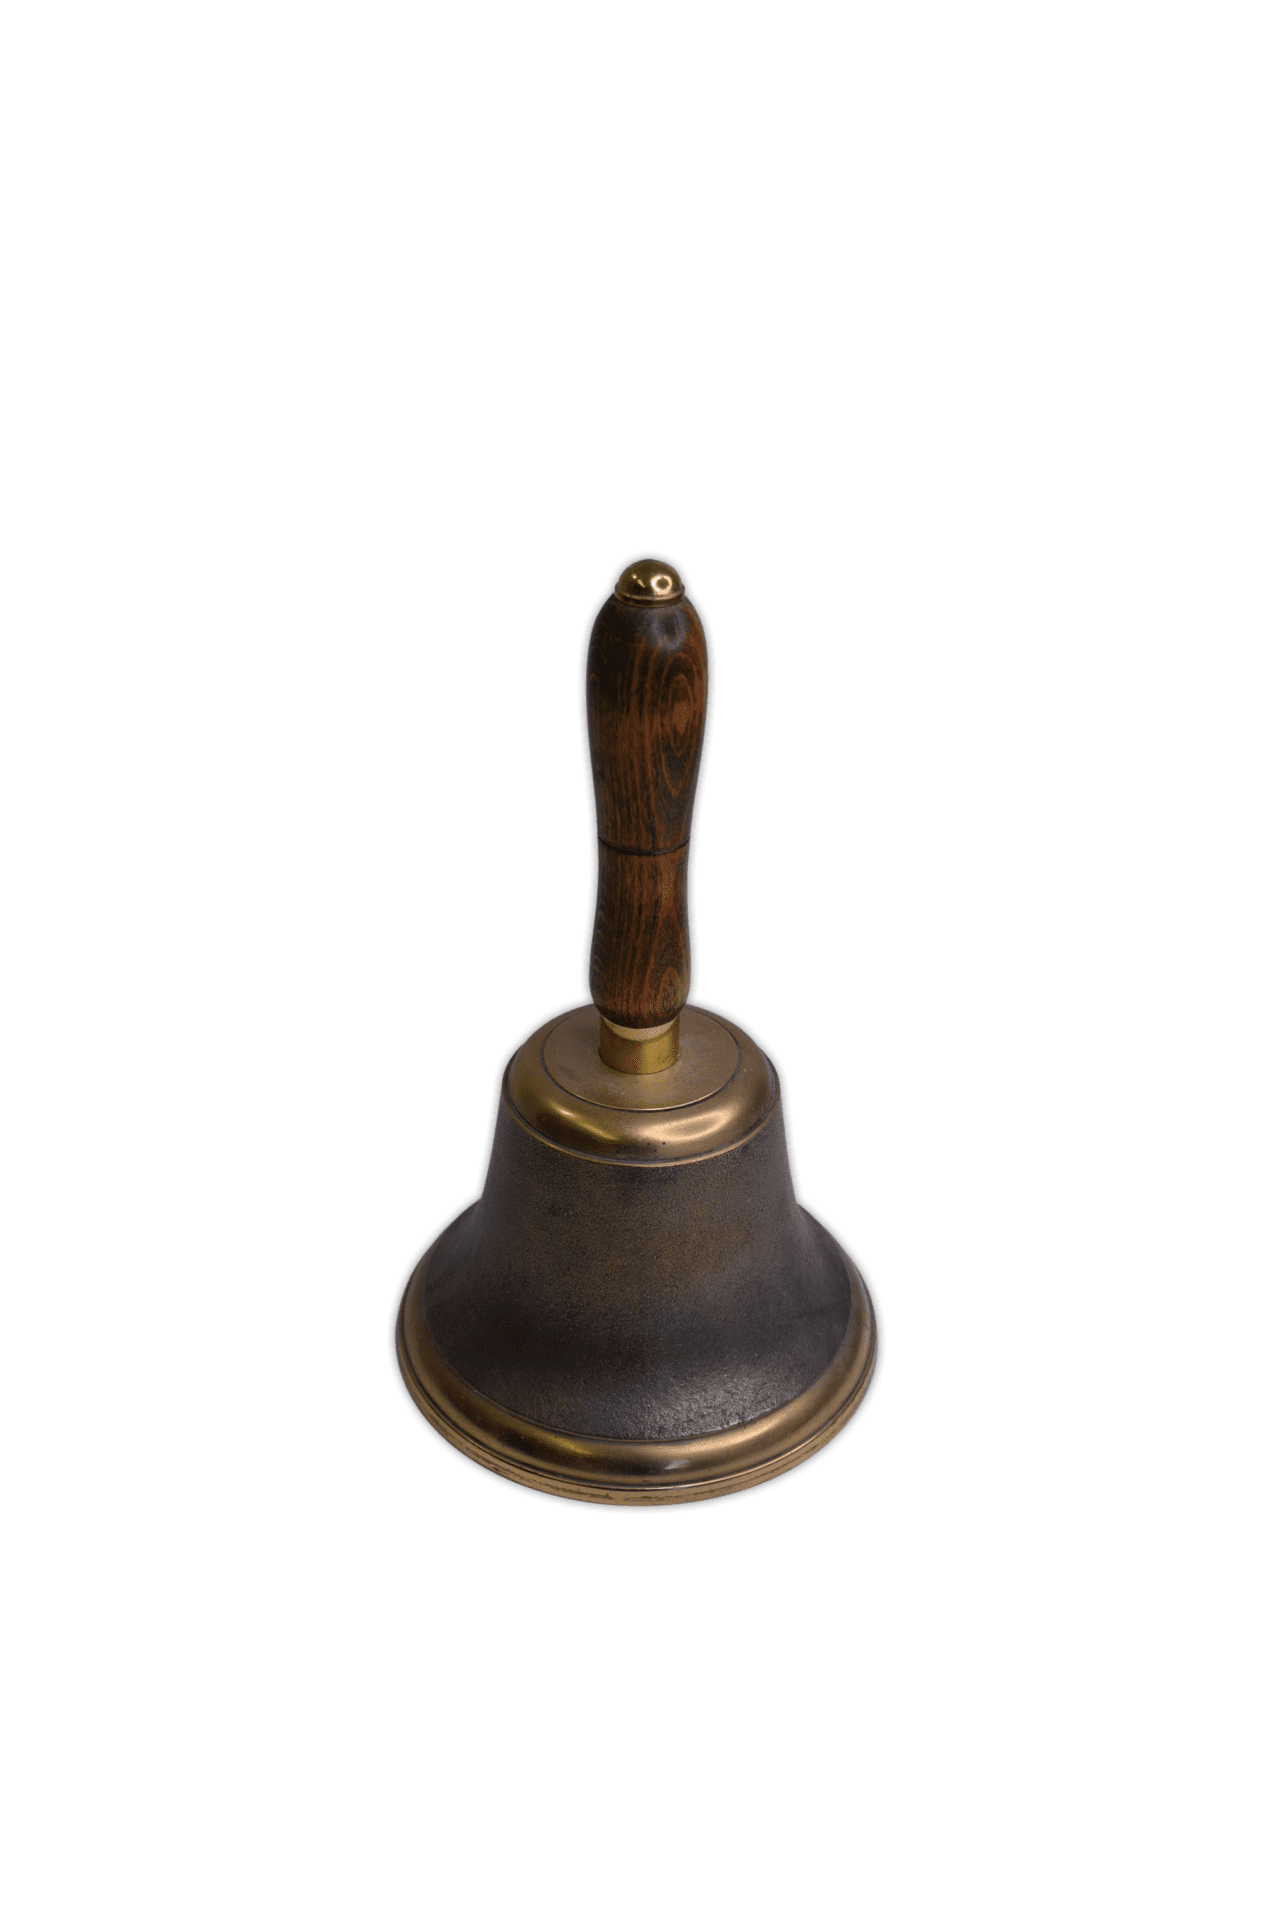 Solid old school bell with a very loud ring.